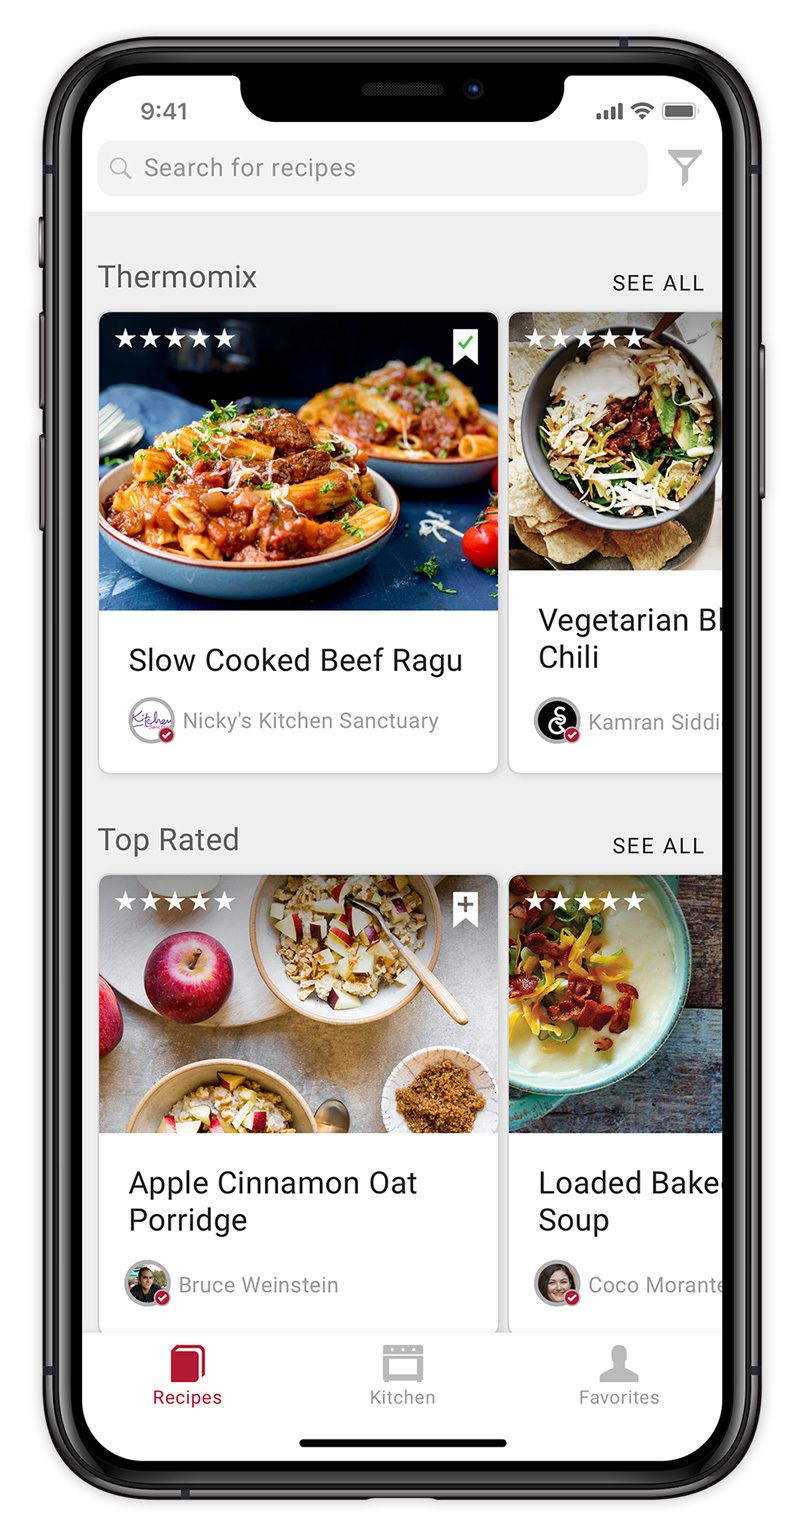 Black phone showing Top Rated recipes from the Drop Recipes app.